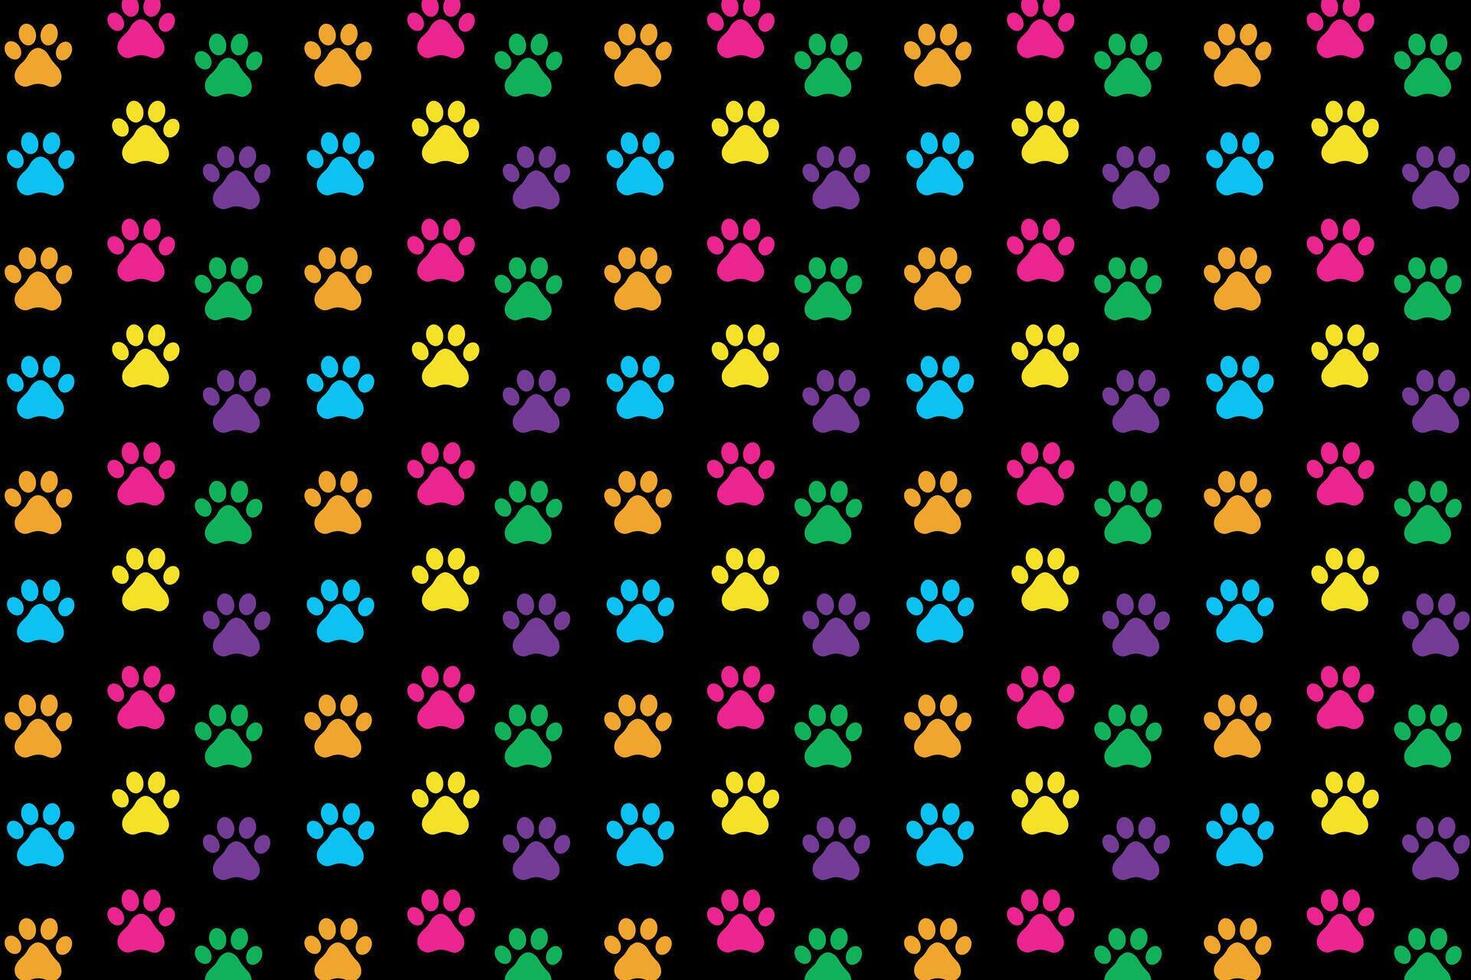 animal paw, pet theme, cat dog, pattern with happy colors and dark background vector